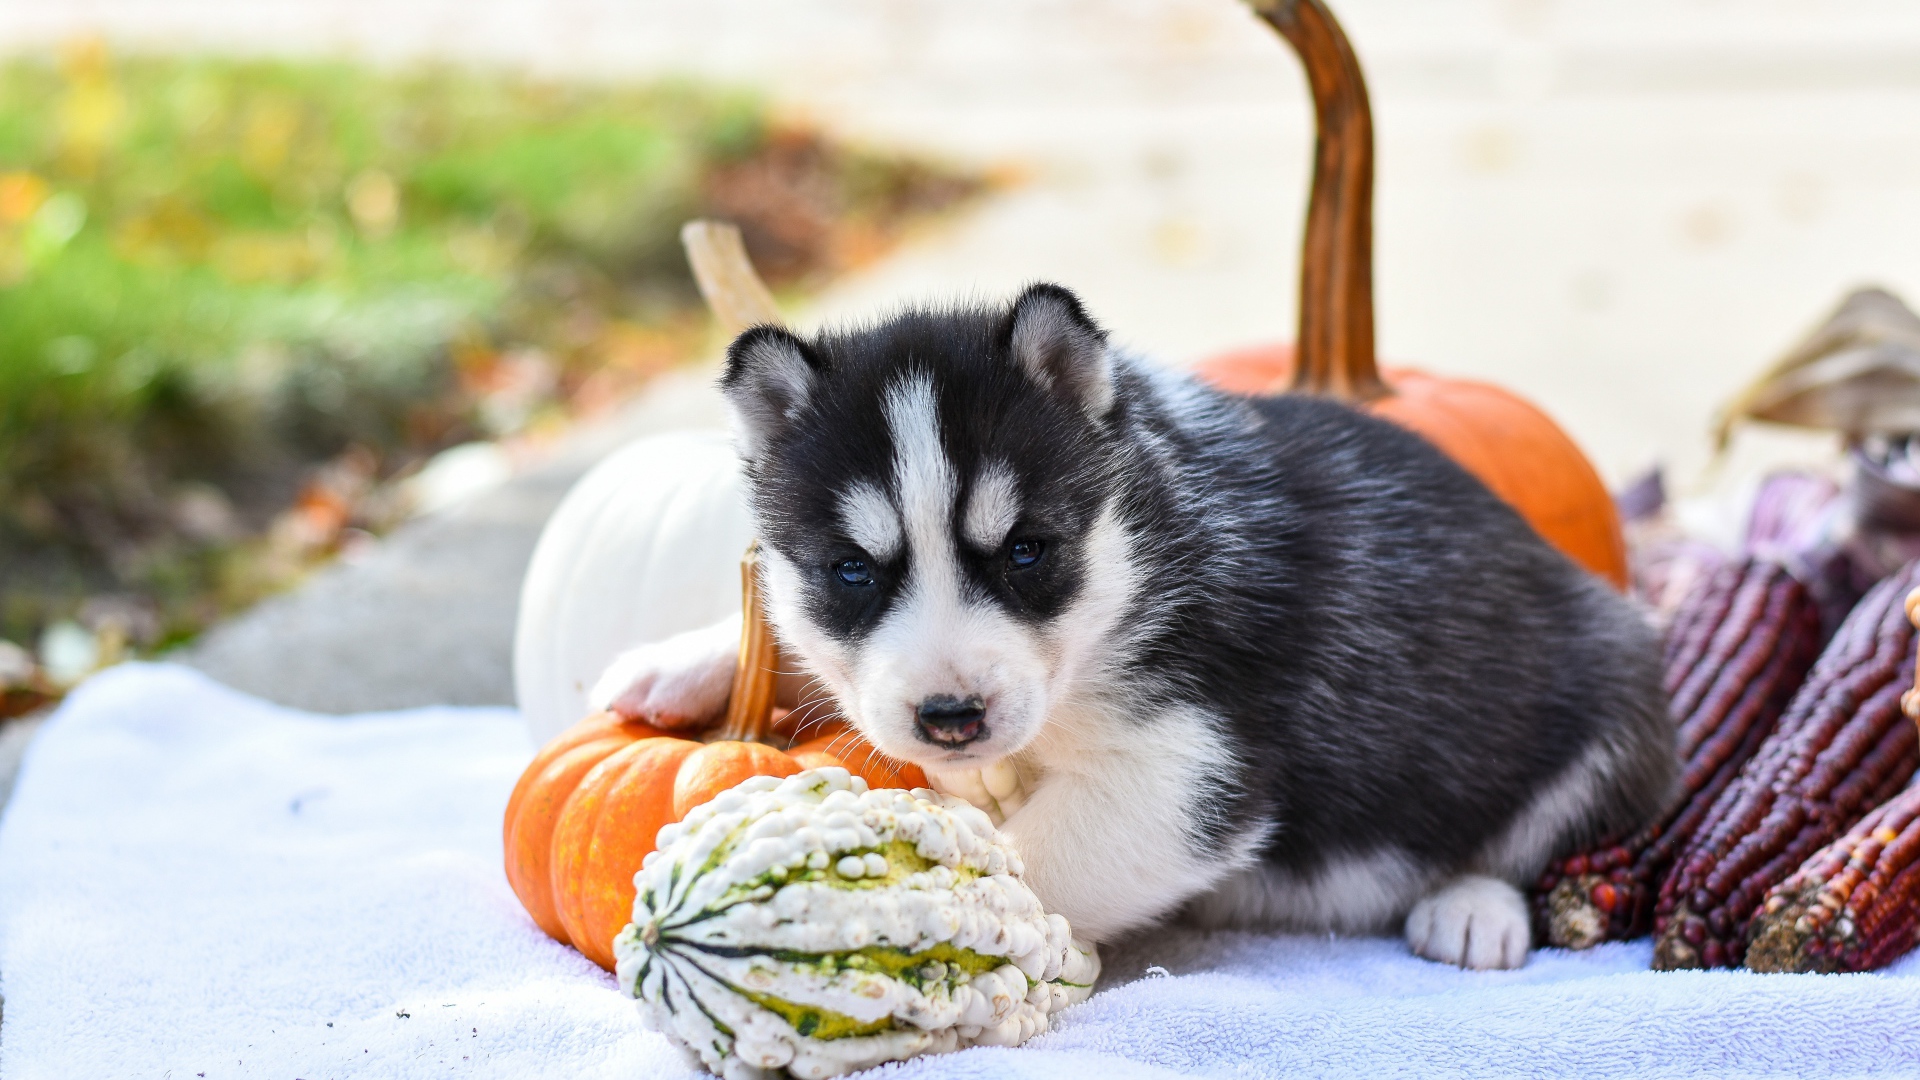 Little husky puppy with pumpkin and corn